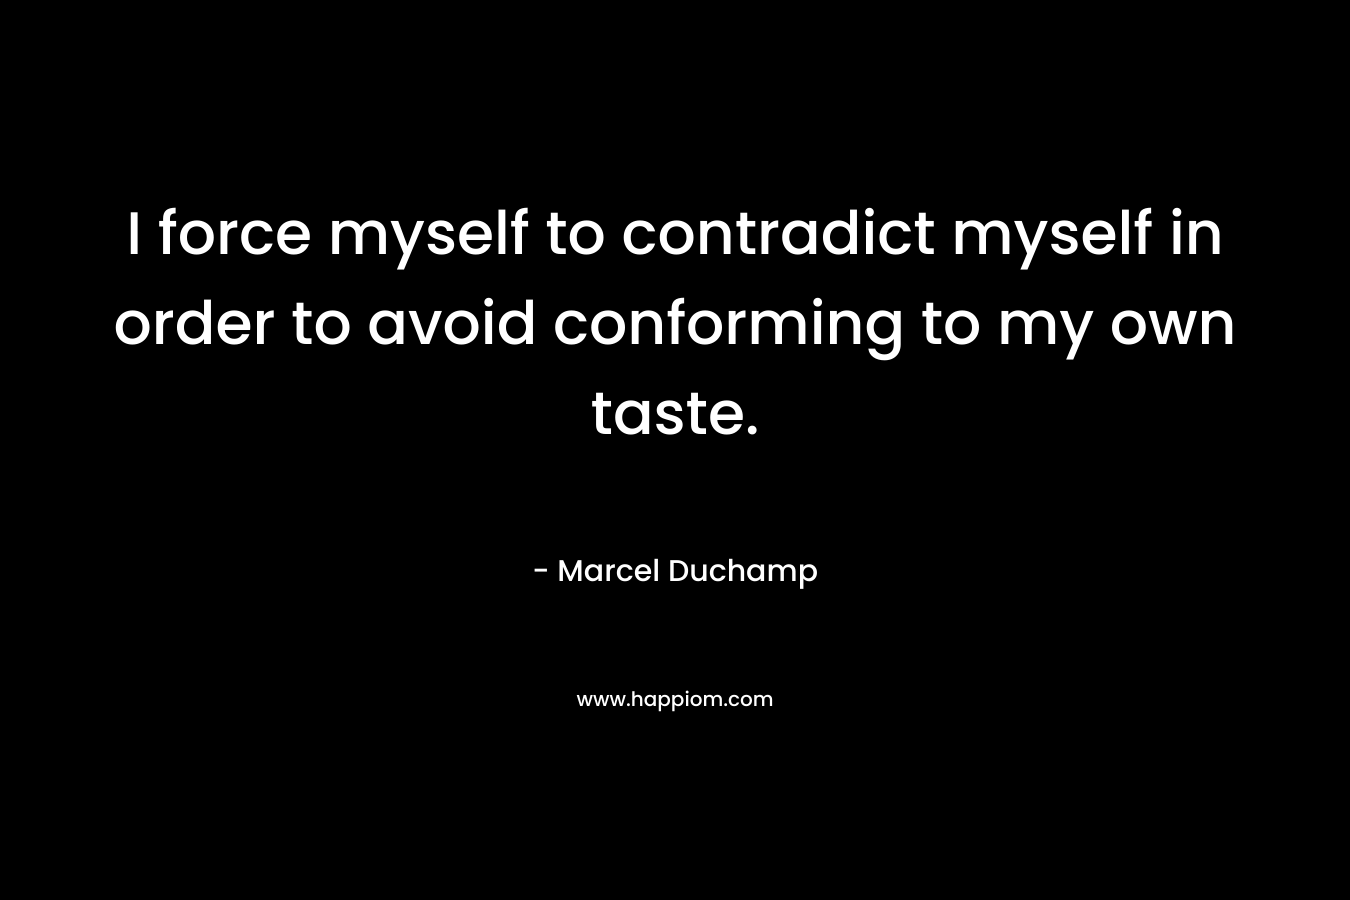 I force myself to contradict myself in order to avoid conforming to my own taste. – Marcel Duchamp